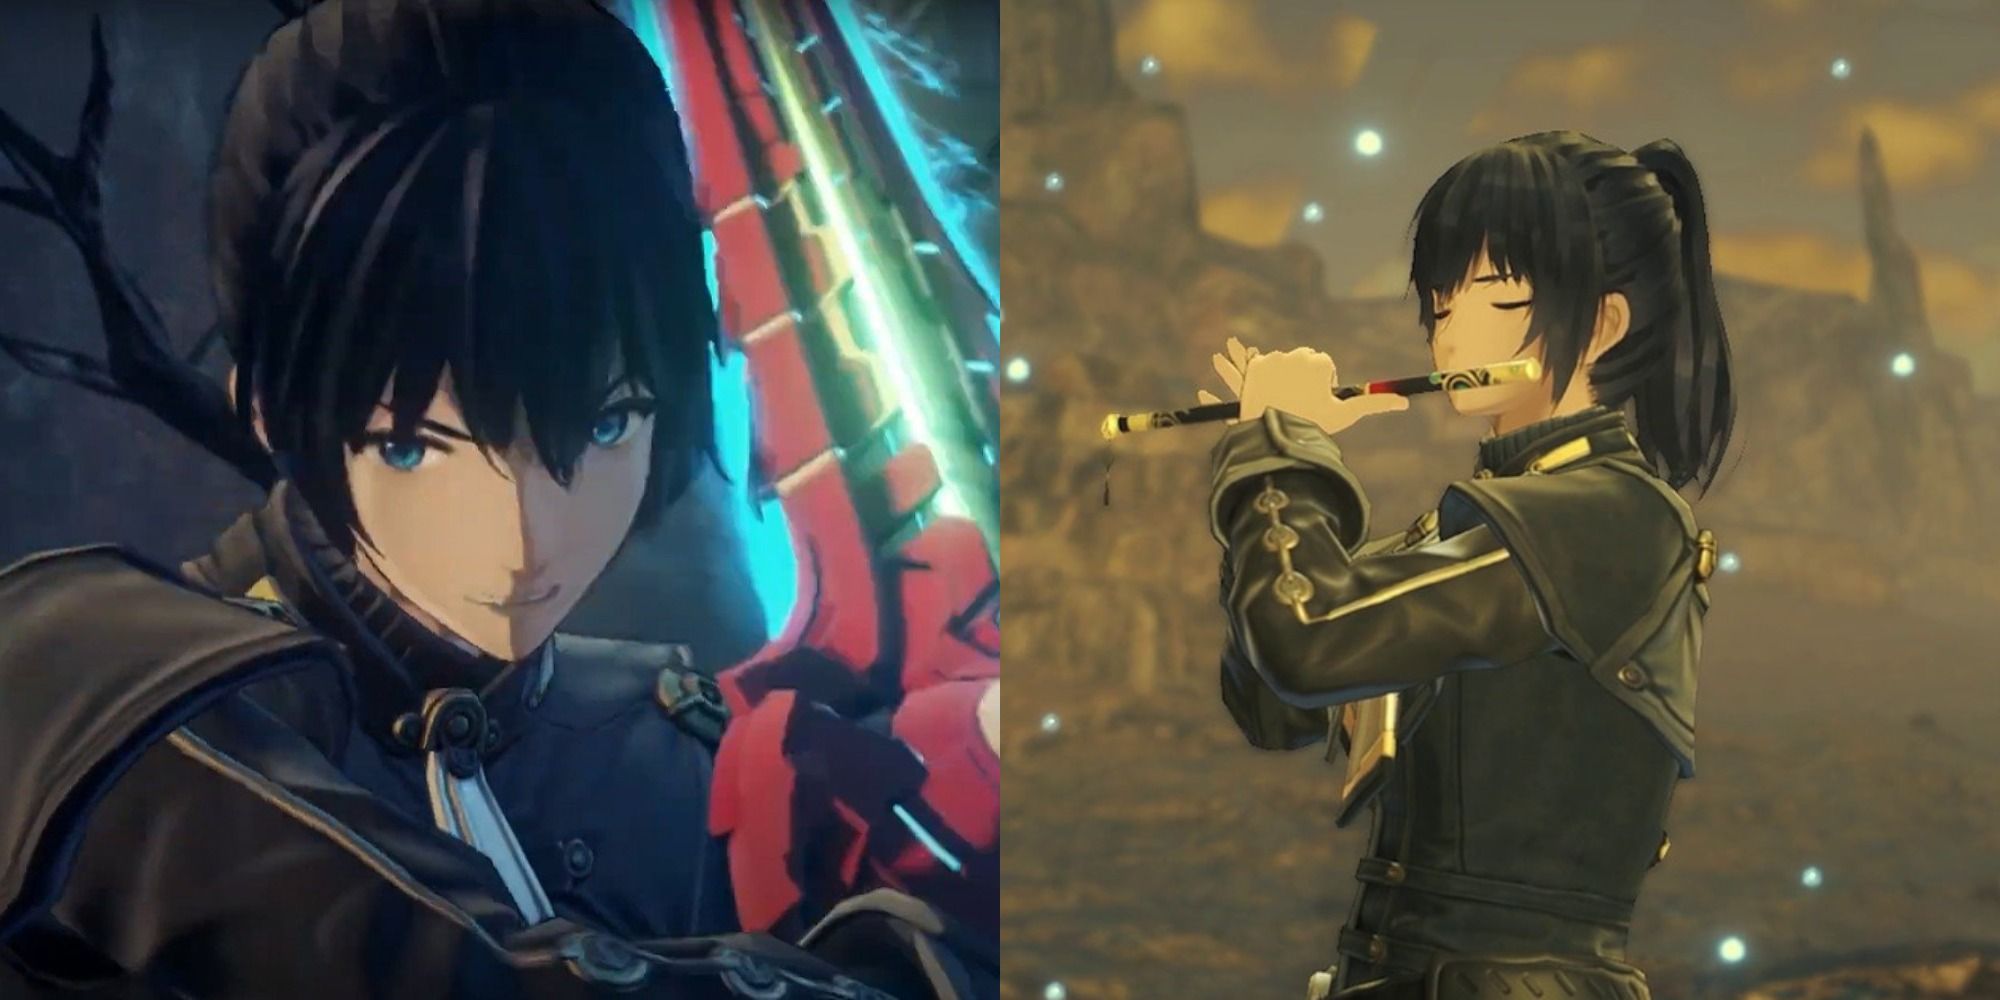 Split image showing a characters from Xenoblade Chronicles 3 with a weapon and a flute